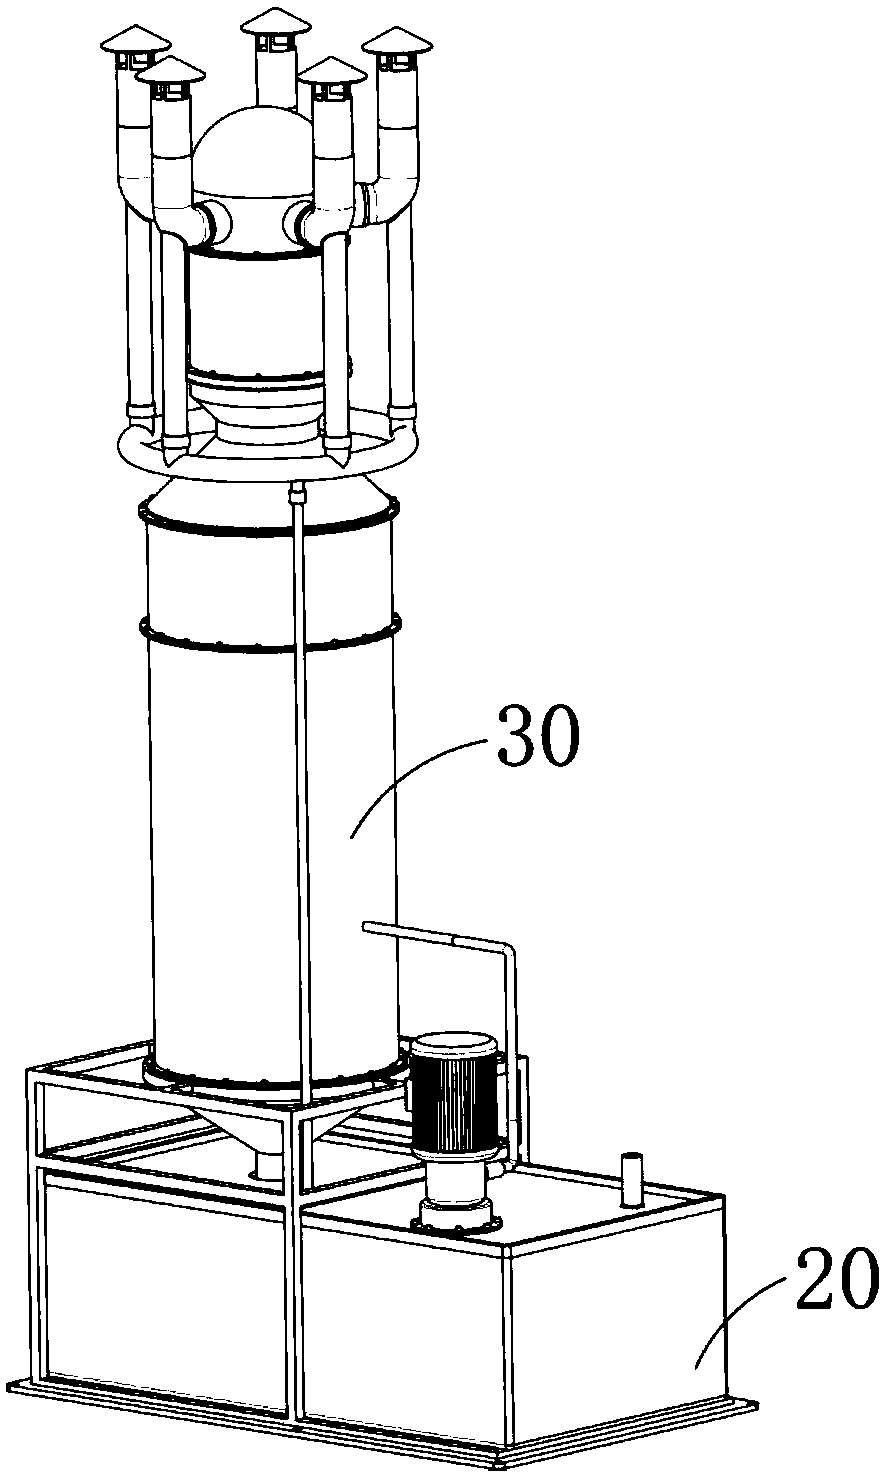 Method of treating industrial dust by means of wet settling